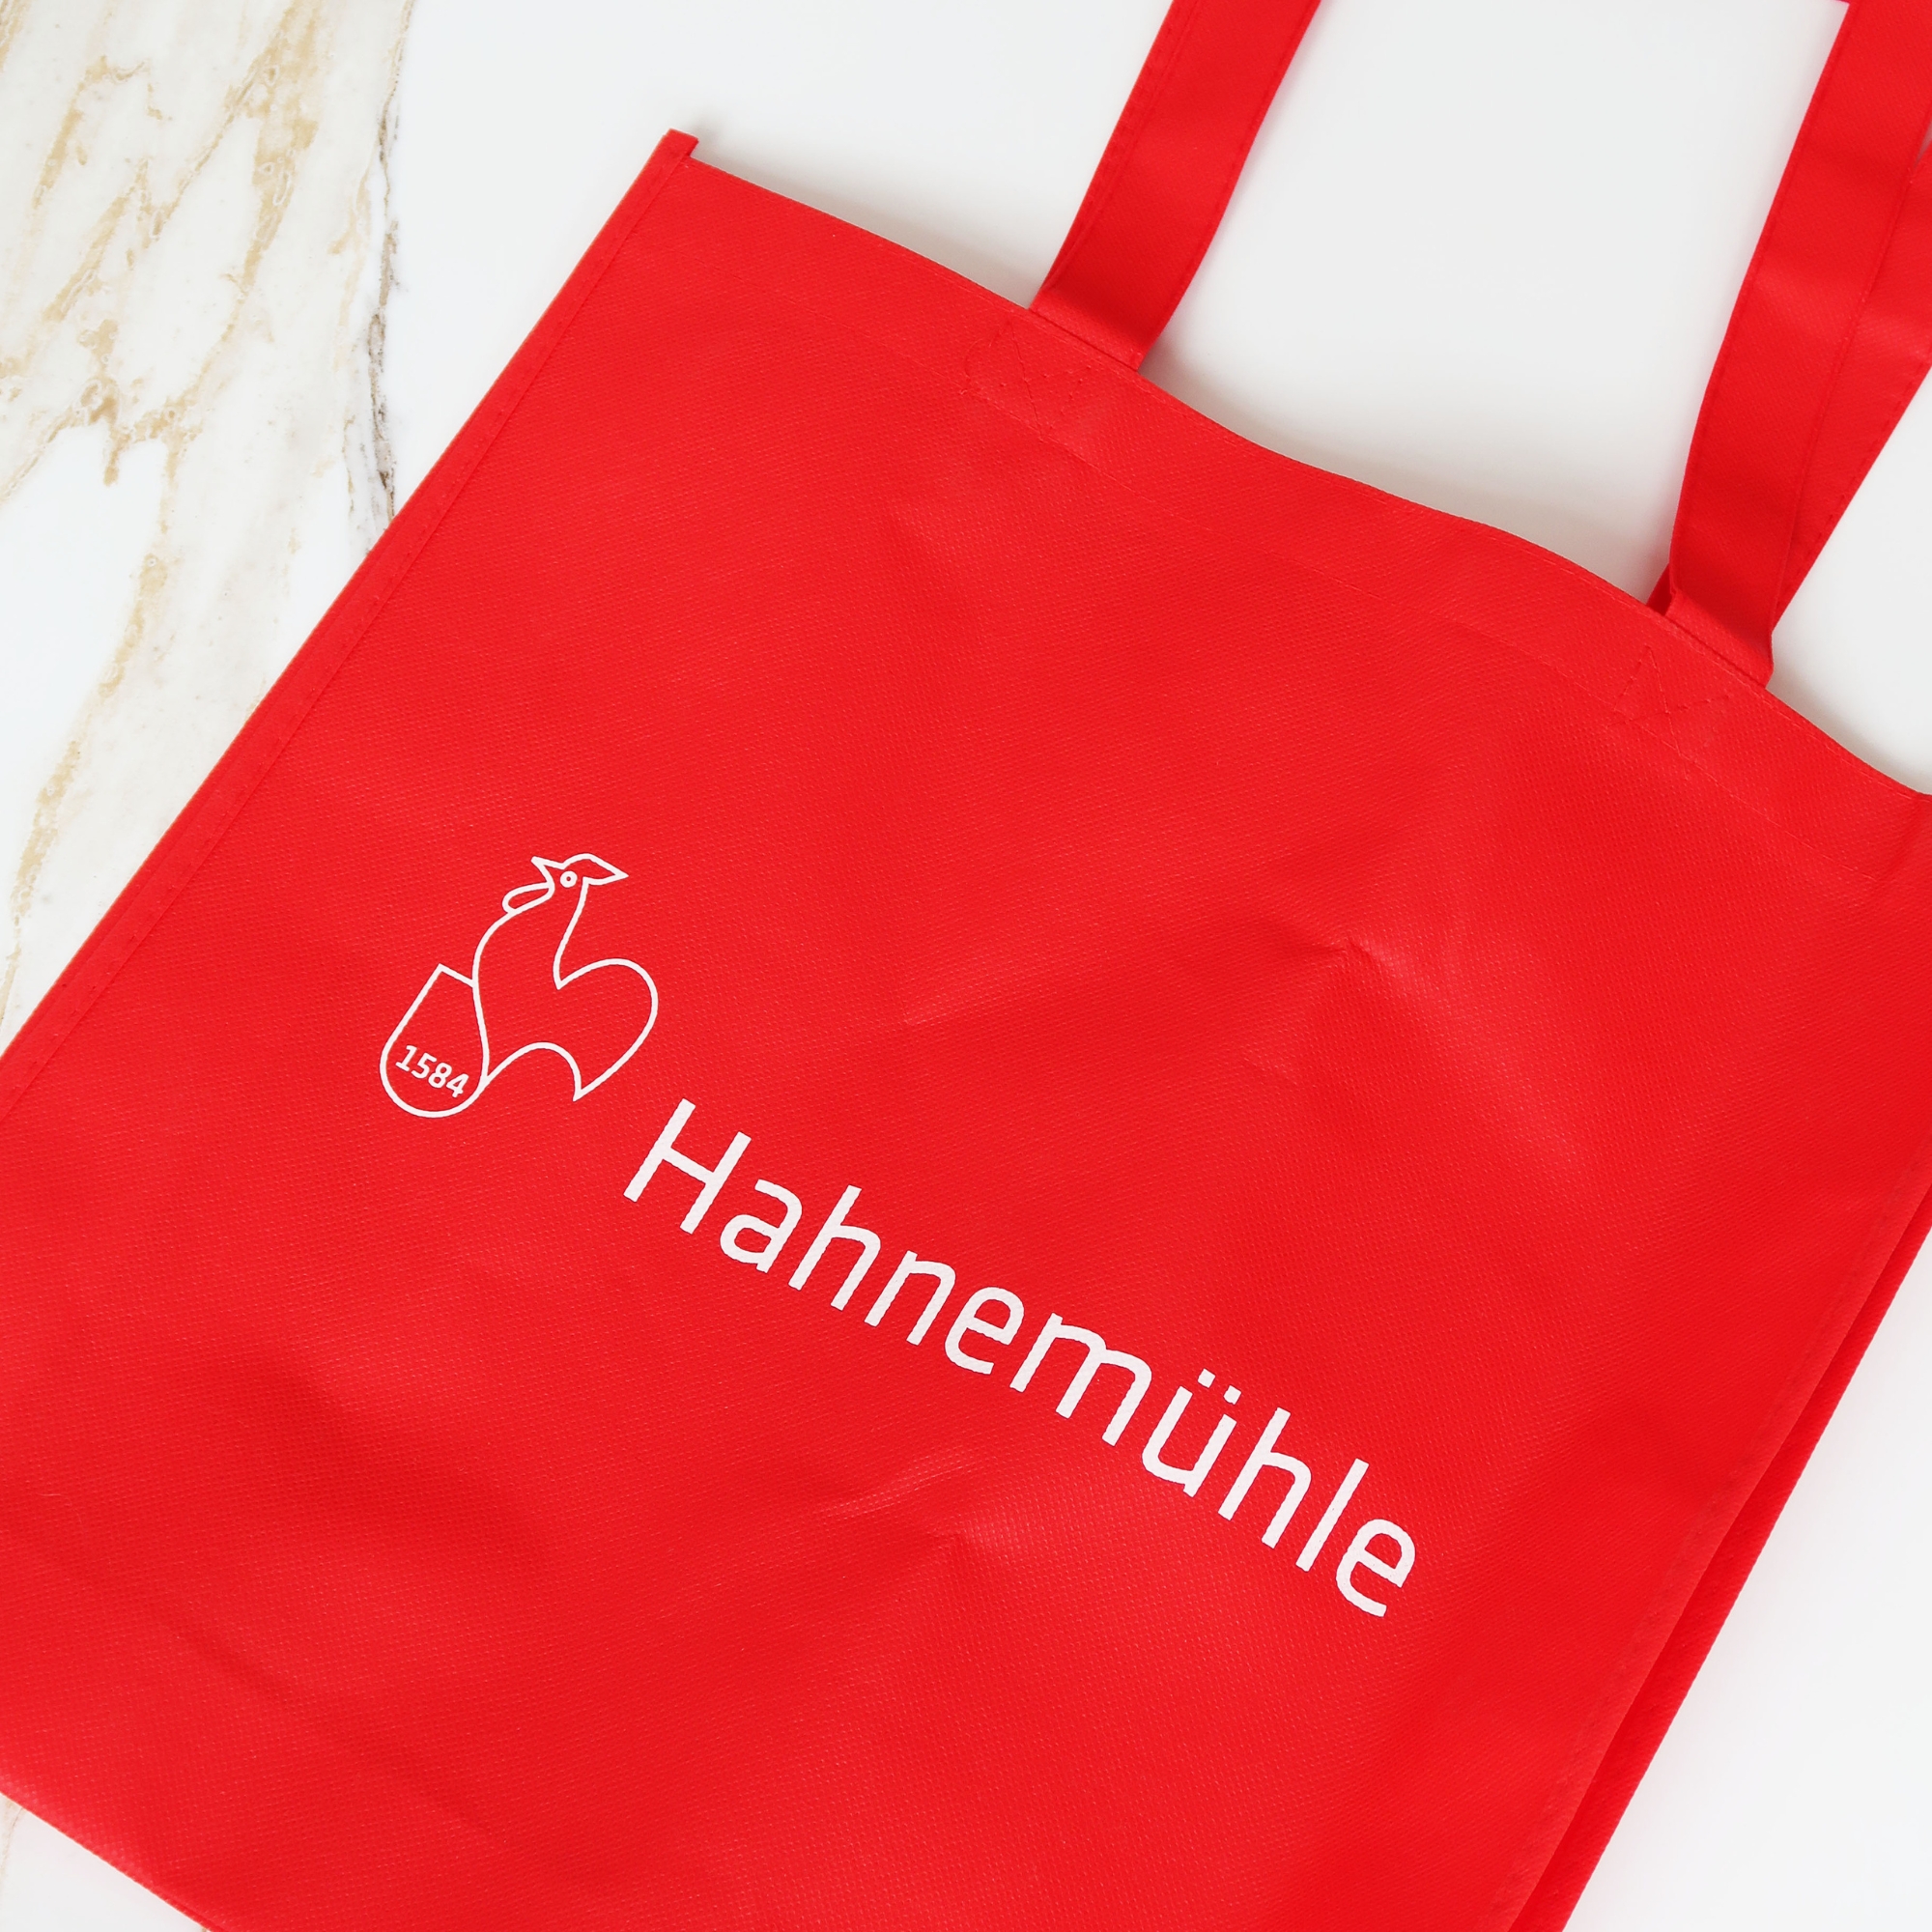 Hahnemühle red bag small